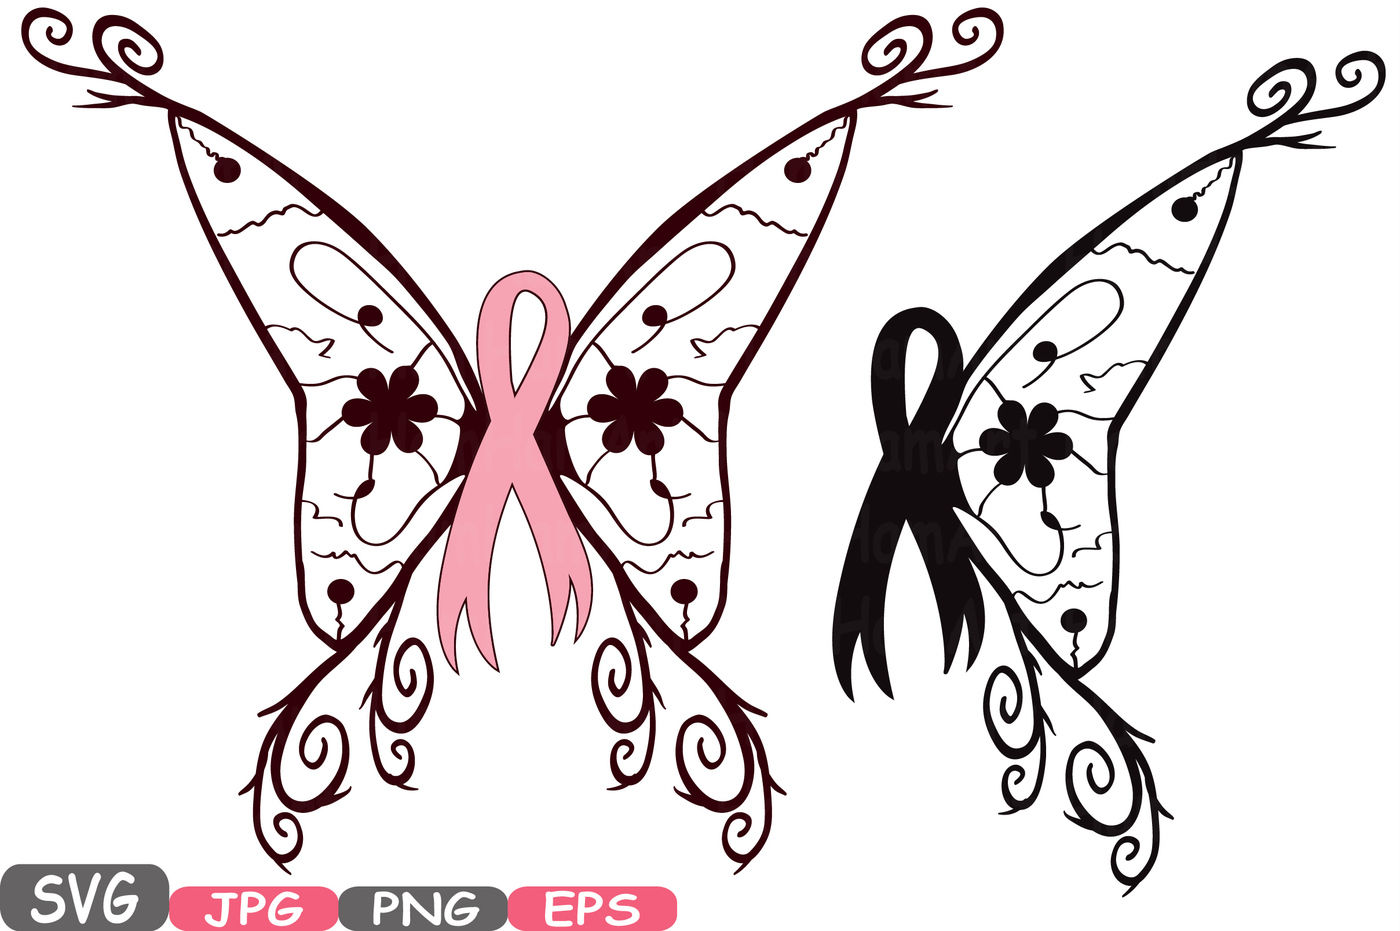 Download Breast Cancer Butterfly Svg Cricut Silhouette Swirl Props Cutting Files Awareness Cancer Survivor Clipart Digital Svg Eps Vinyl Sale 514s By Hamhamart Thehungryjpeg Com SVG, PNG, EPS, DXF File